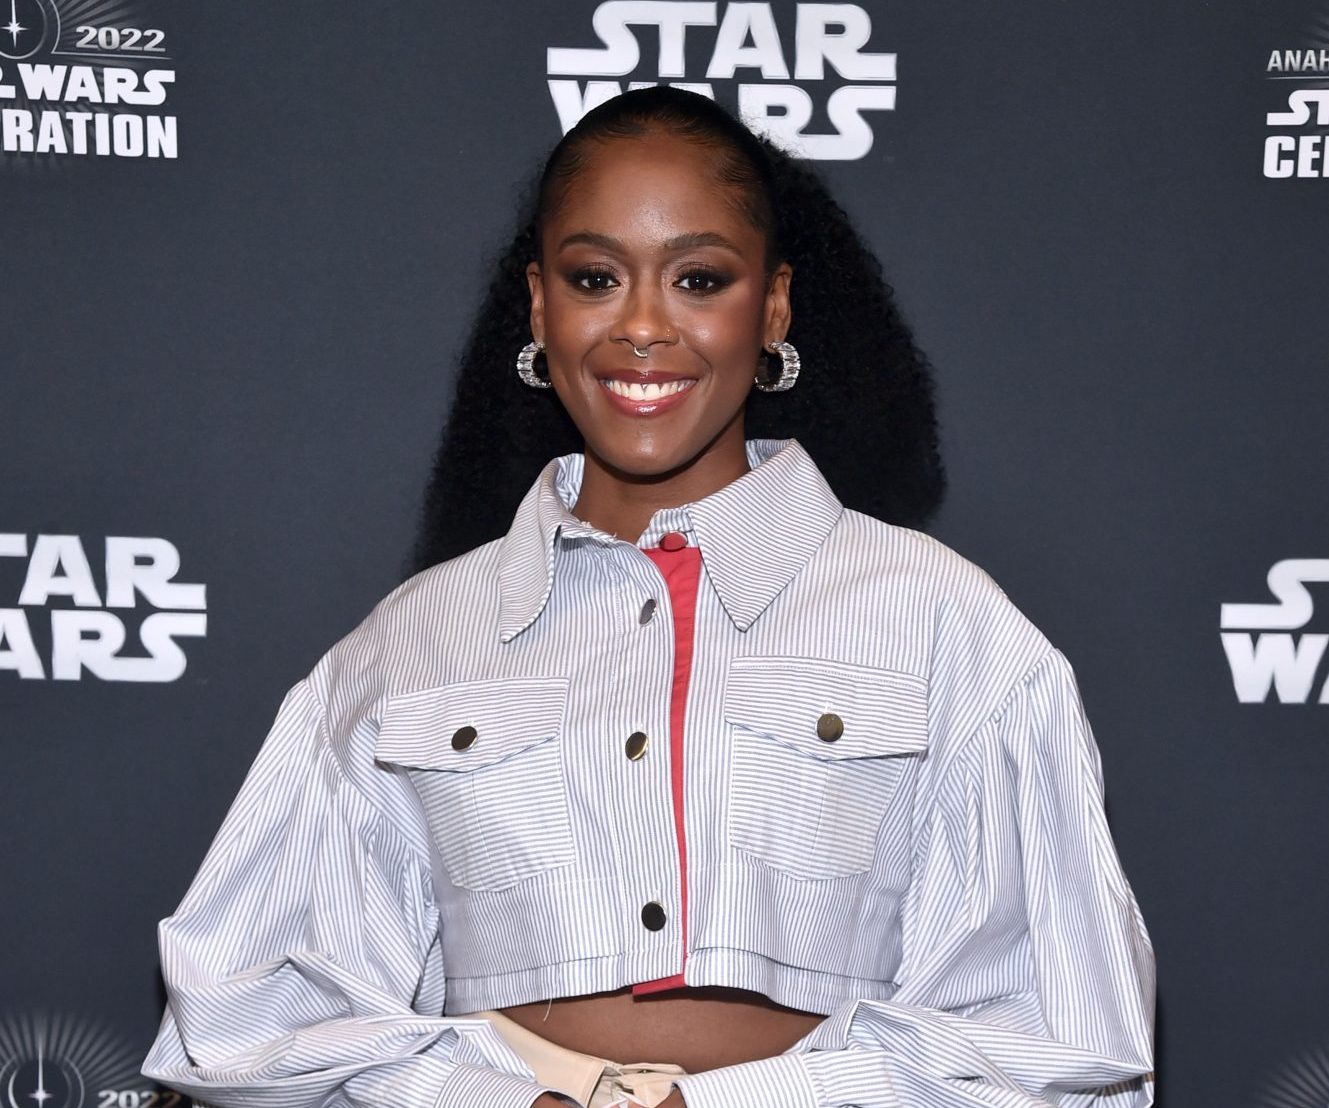 "Star Wars" speaks out in response to the backlash and racist comments that actress Moses Ingram has received since their miniseries premiere